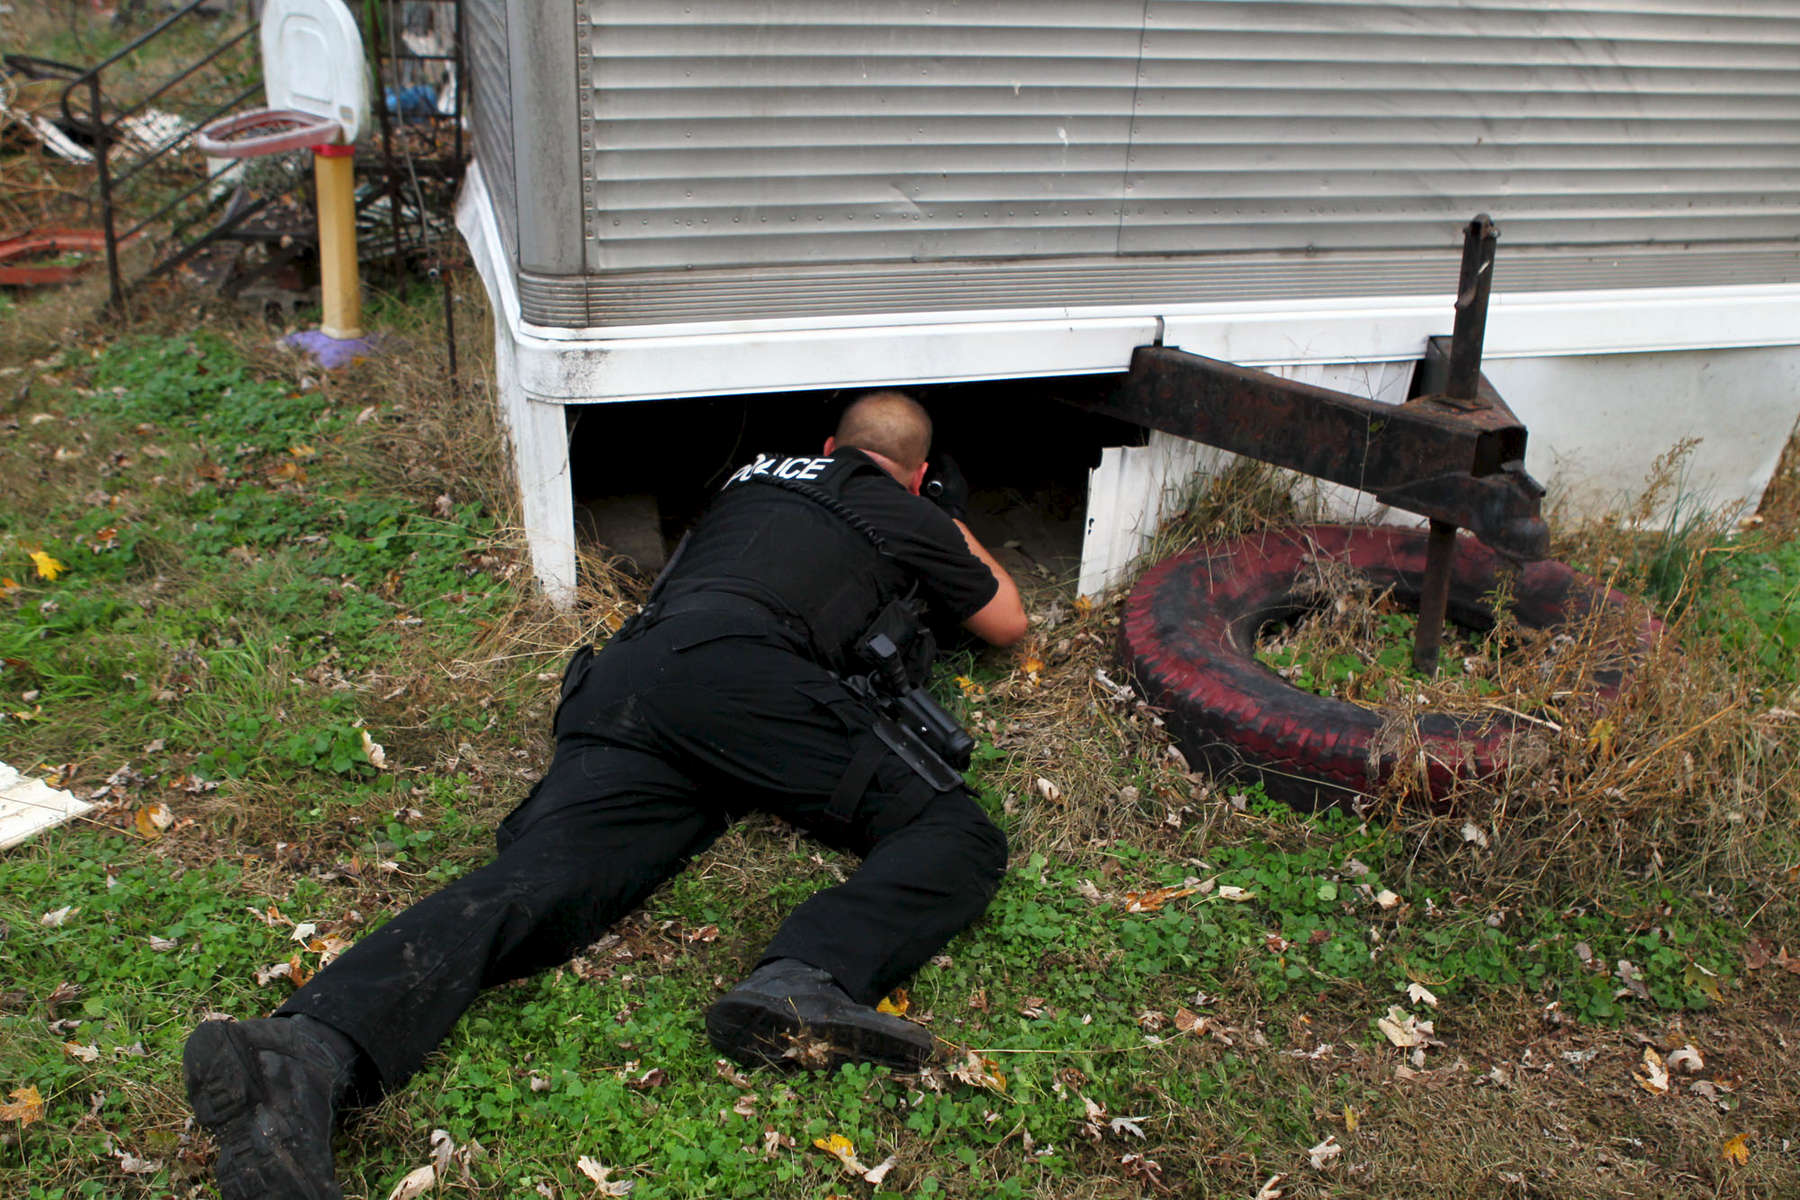 A Belleville police officer investigates the scene where a robbery suspect was found hiding under a mobile home.According to Belleville detective  Mark Hefferman, Police received a call around 6:40 am Monday morning about a robbery at the Circle K in Belleville. Police identified the car involved and attempted to make a traffic stop. The car fled and both suspects were found in unincorporated Collinville. One suspect was arrested without incident, the other was found under a mobile home in the 3200 block of University Street. 